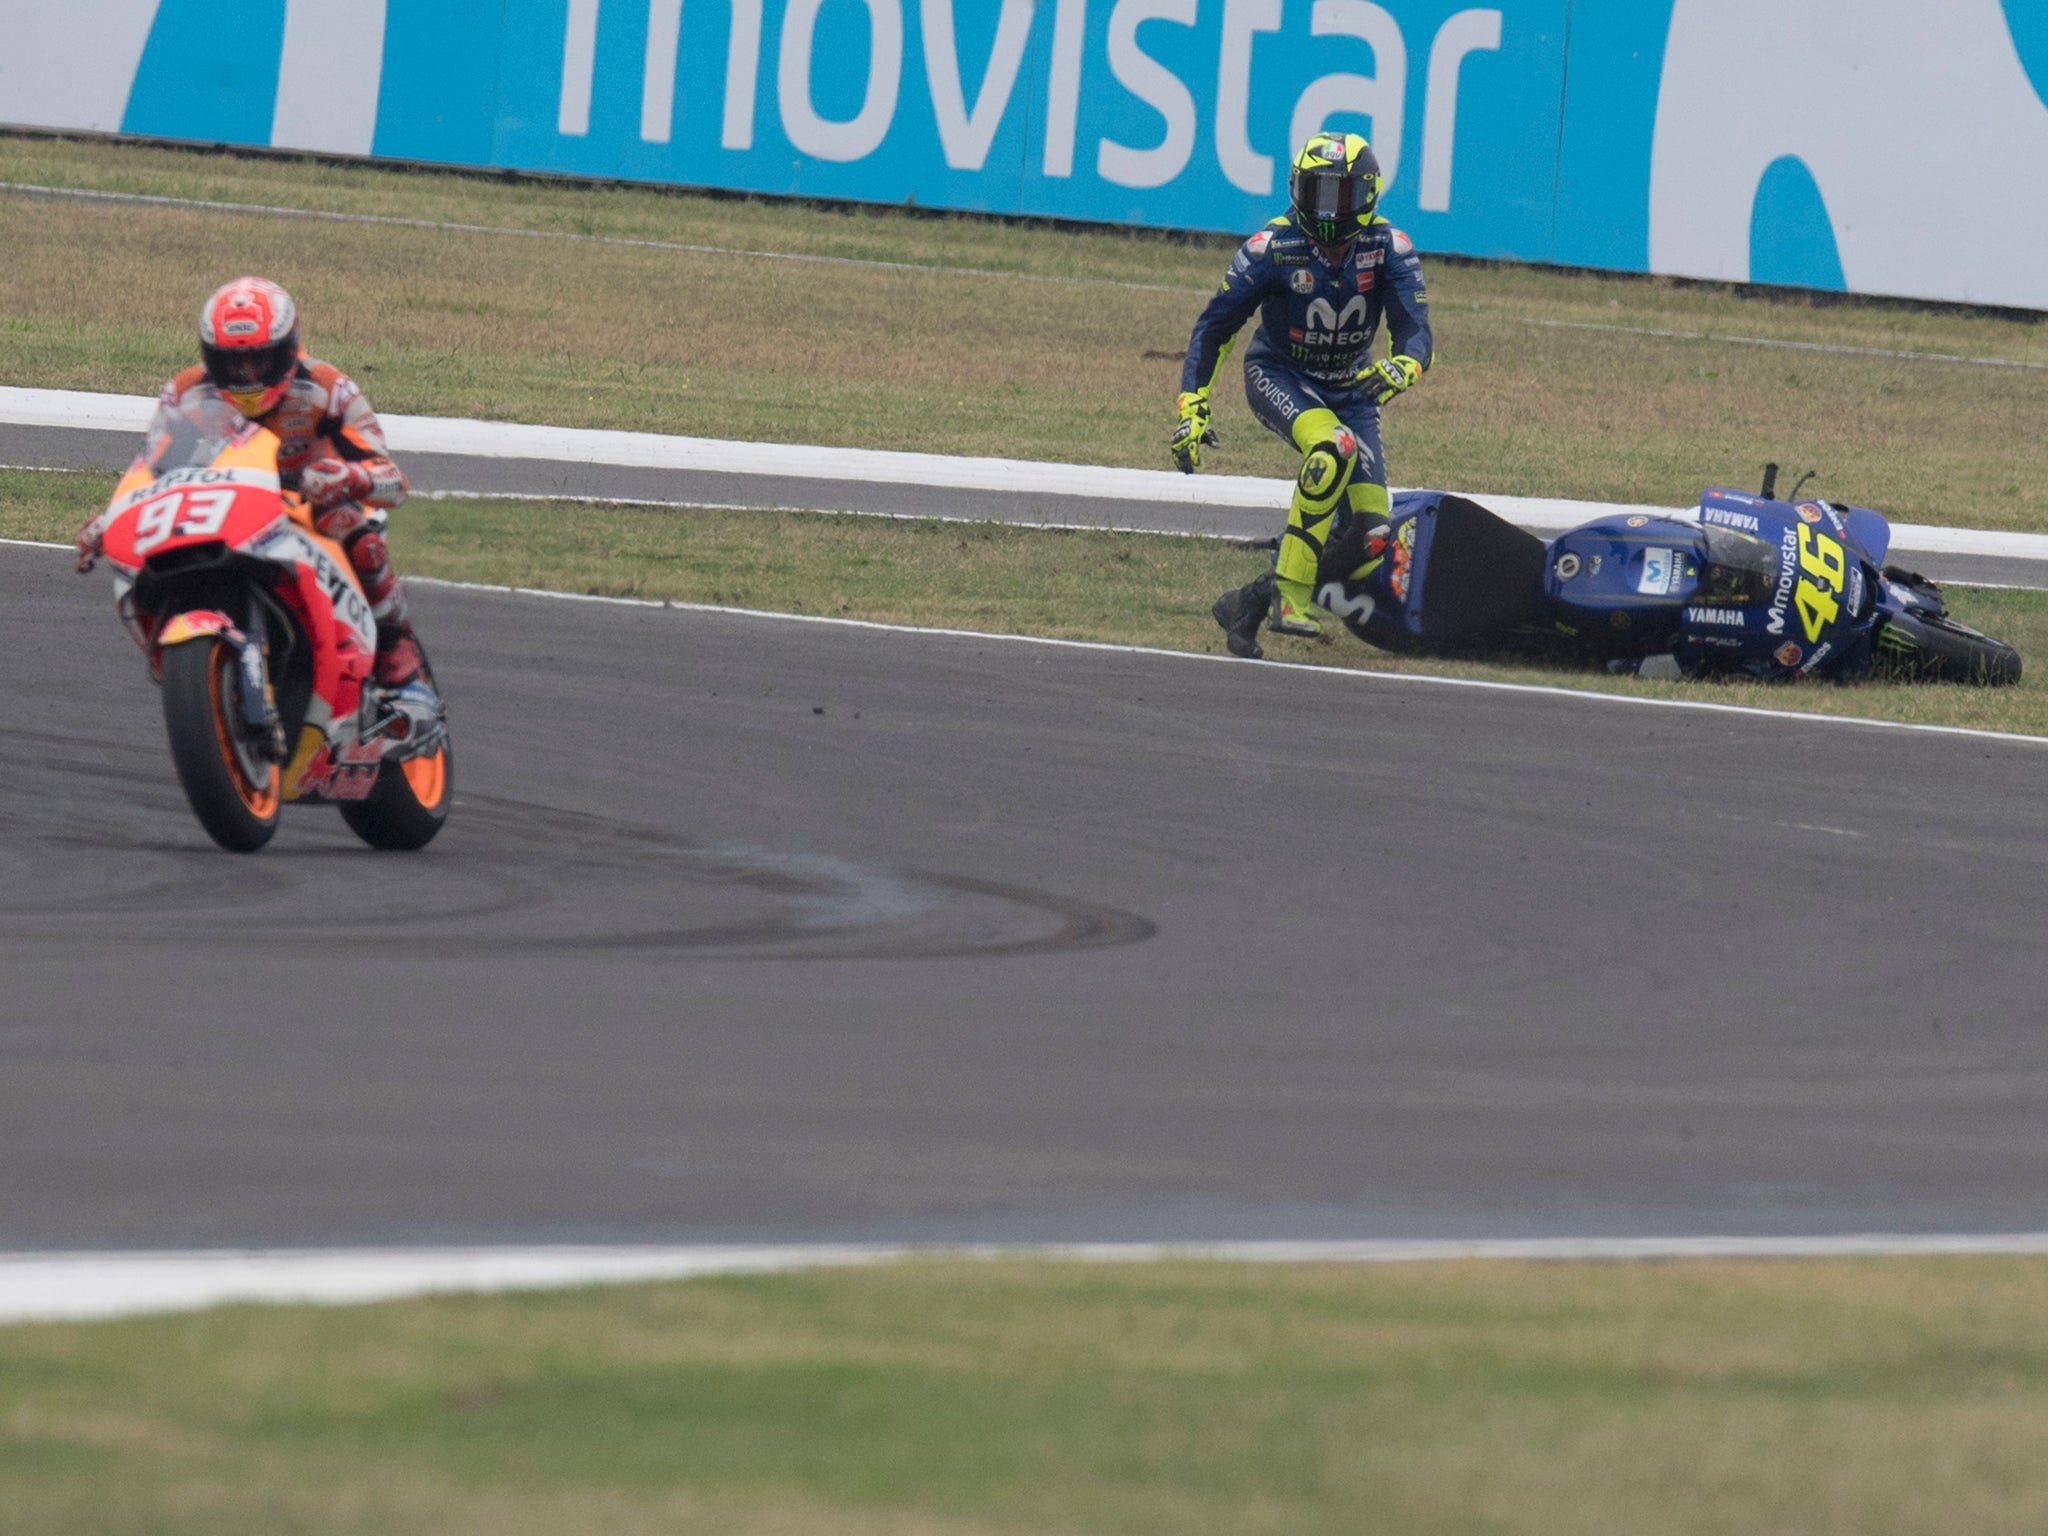 Marc Marquez was judged to have forced Valentino Rossi off the track